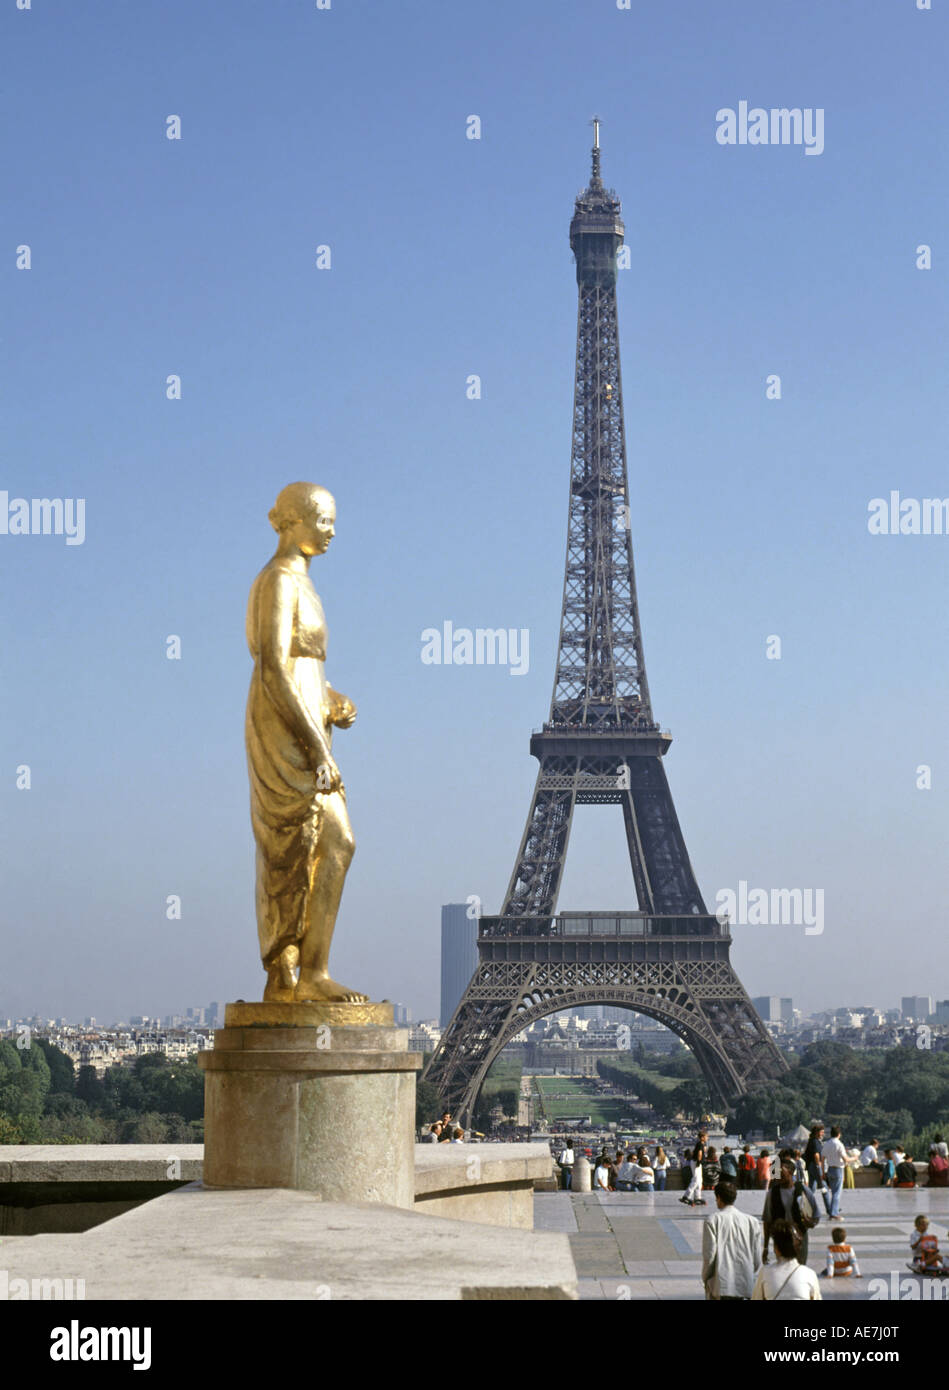 One of eight gilded gold statues at place du Trocadéro on terrace of the Rights of Man with Eiffel Tower landmark structure beyond Paris France EU Stock Photo